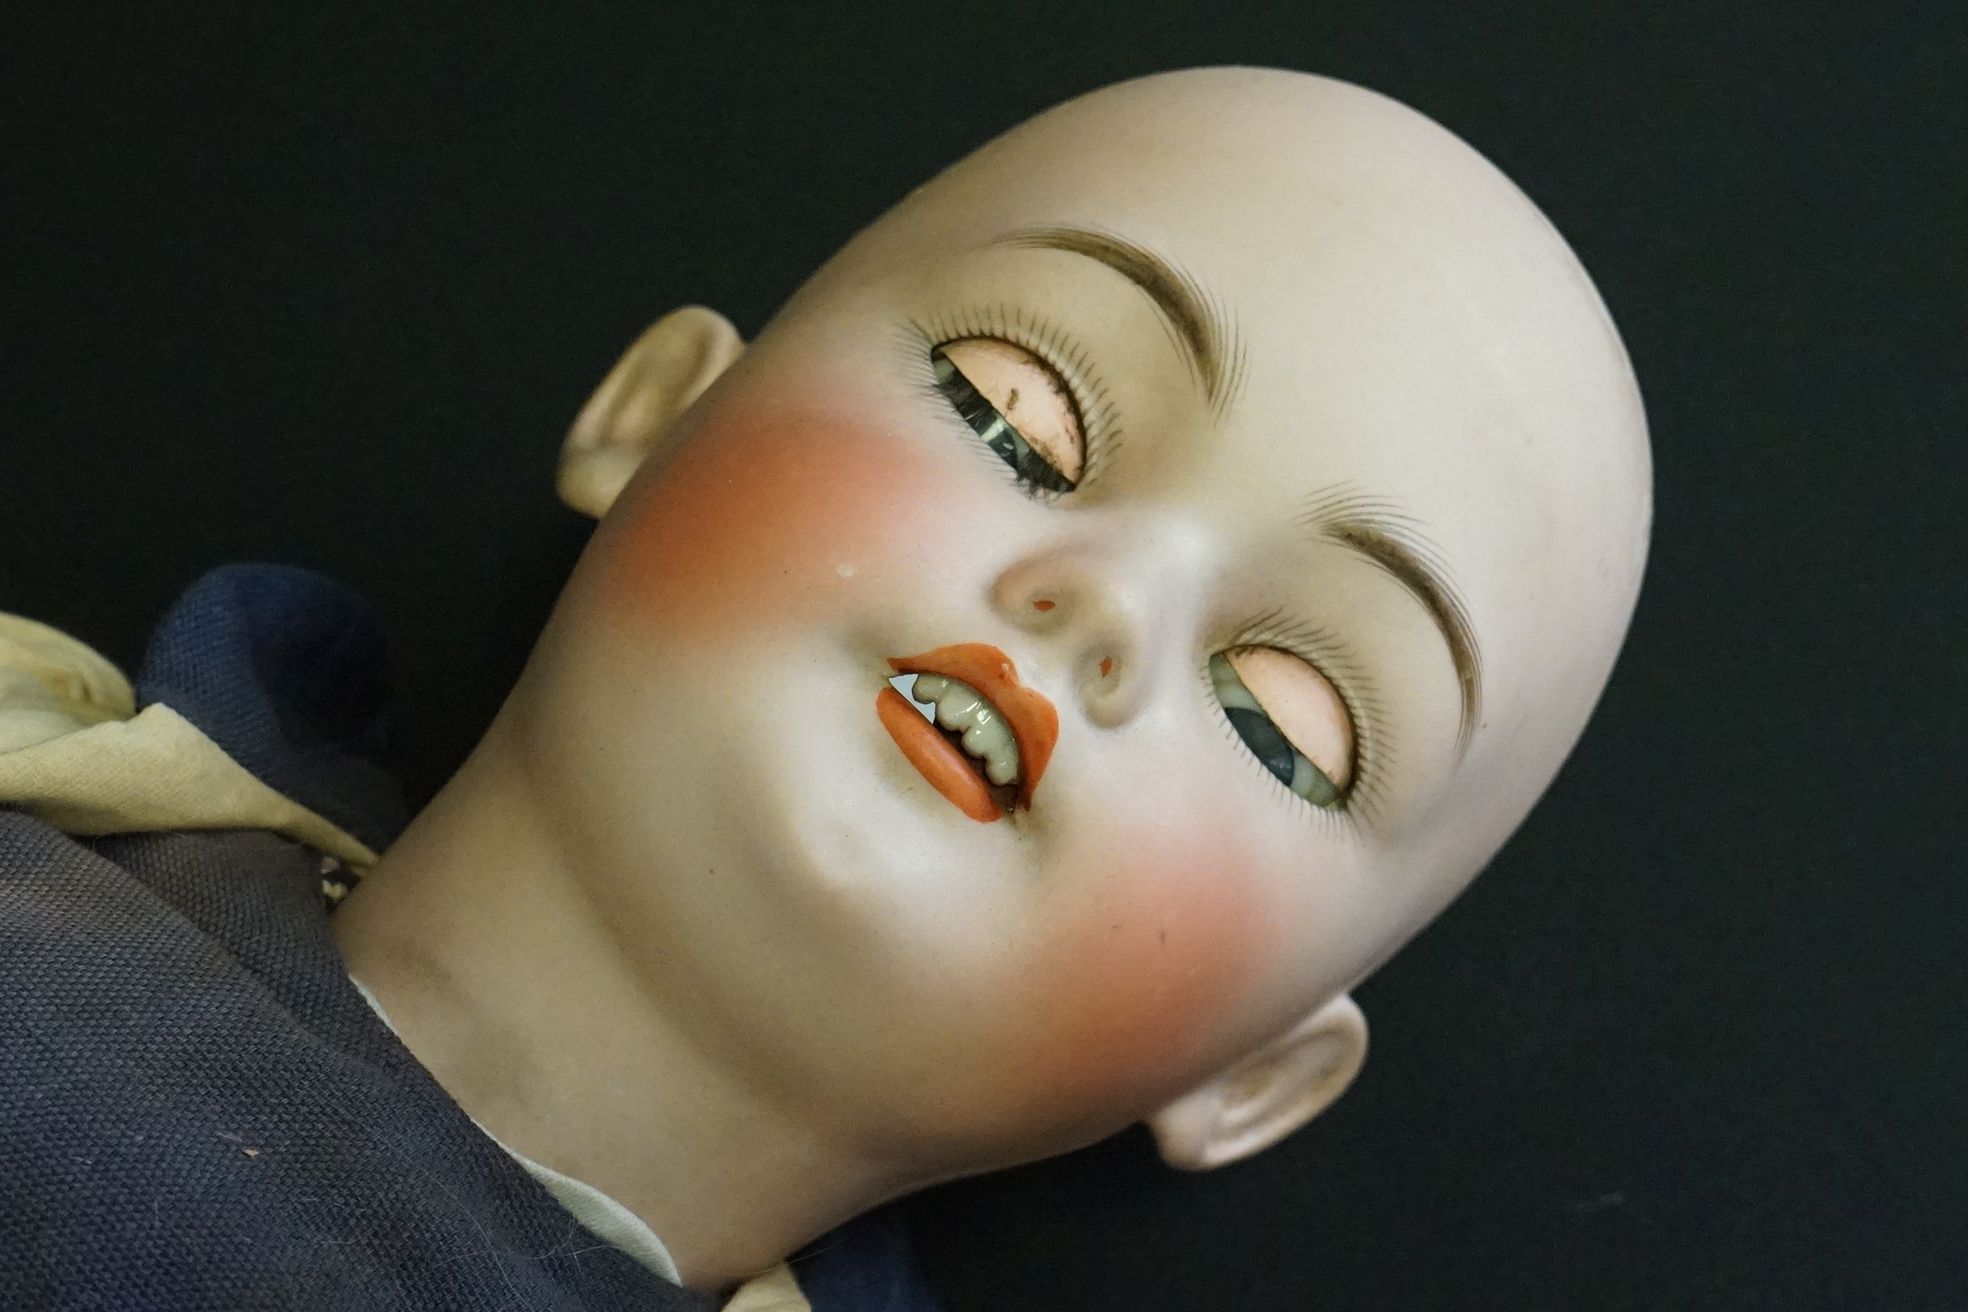 Simon & Halbig Bisque Head Doll, the back of head stamped 1078, Germany, Simon & Halbig 13, blue - Image 7 of 10